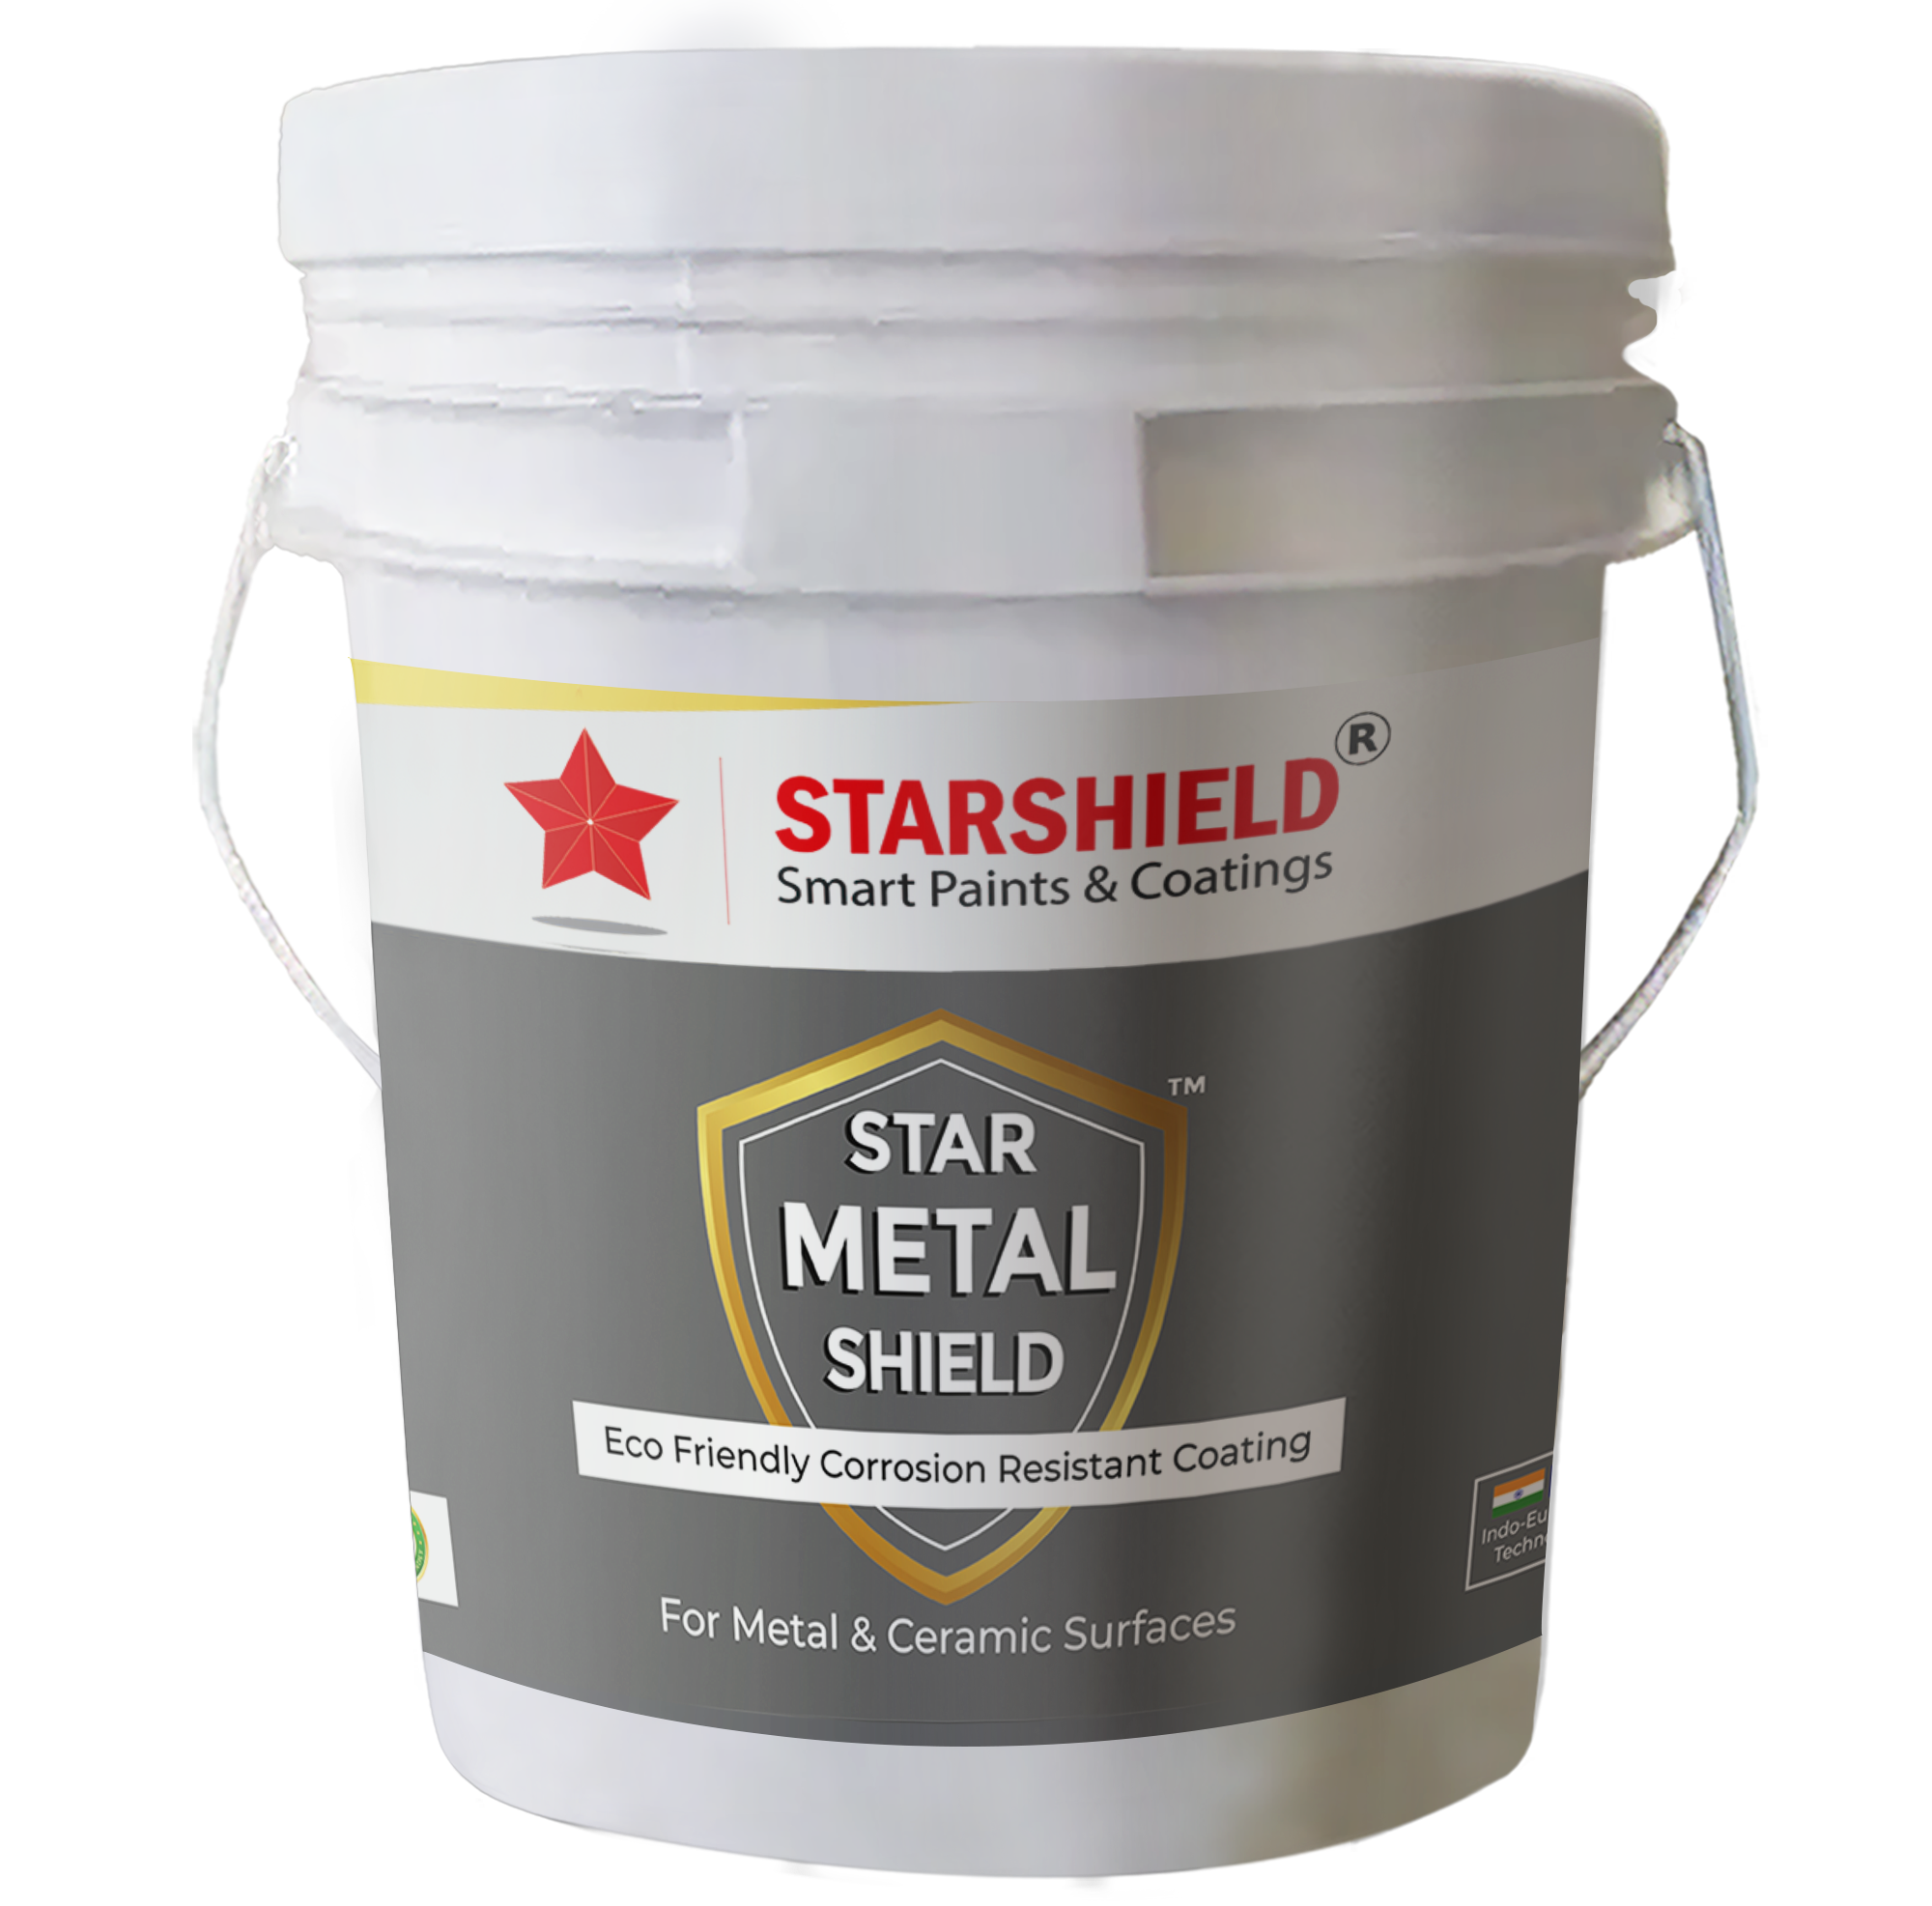 corrosion resistant coating